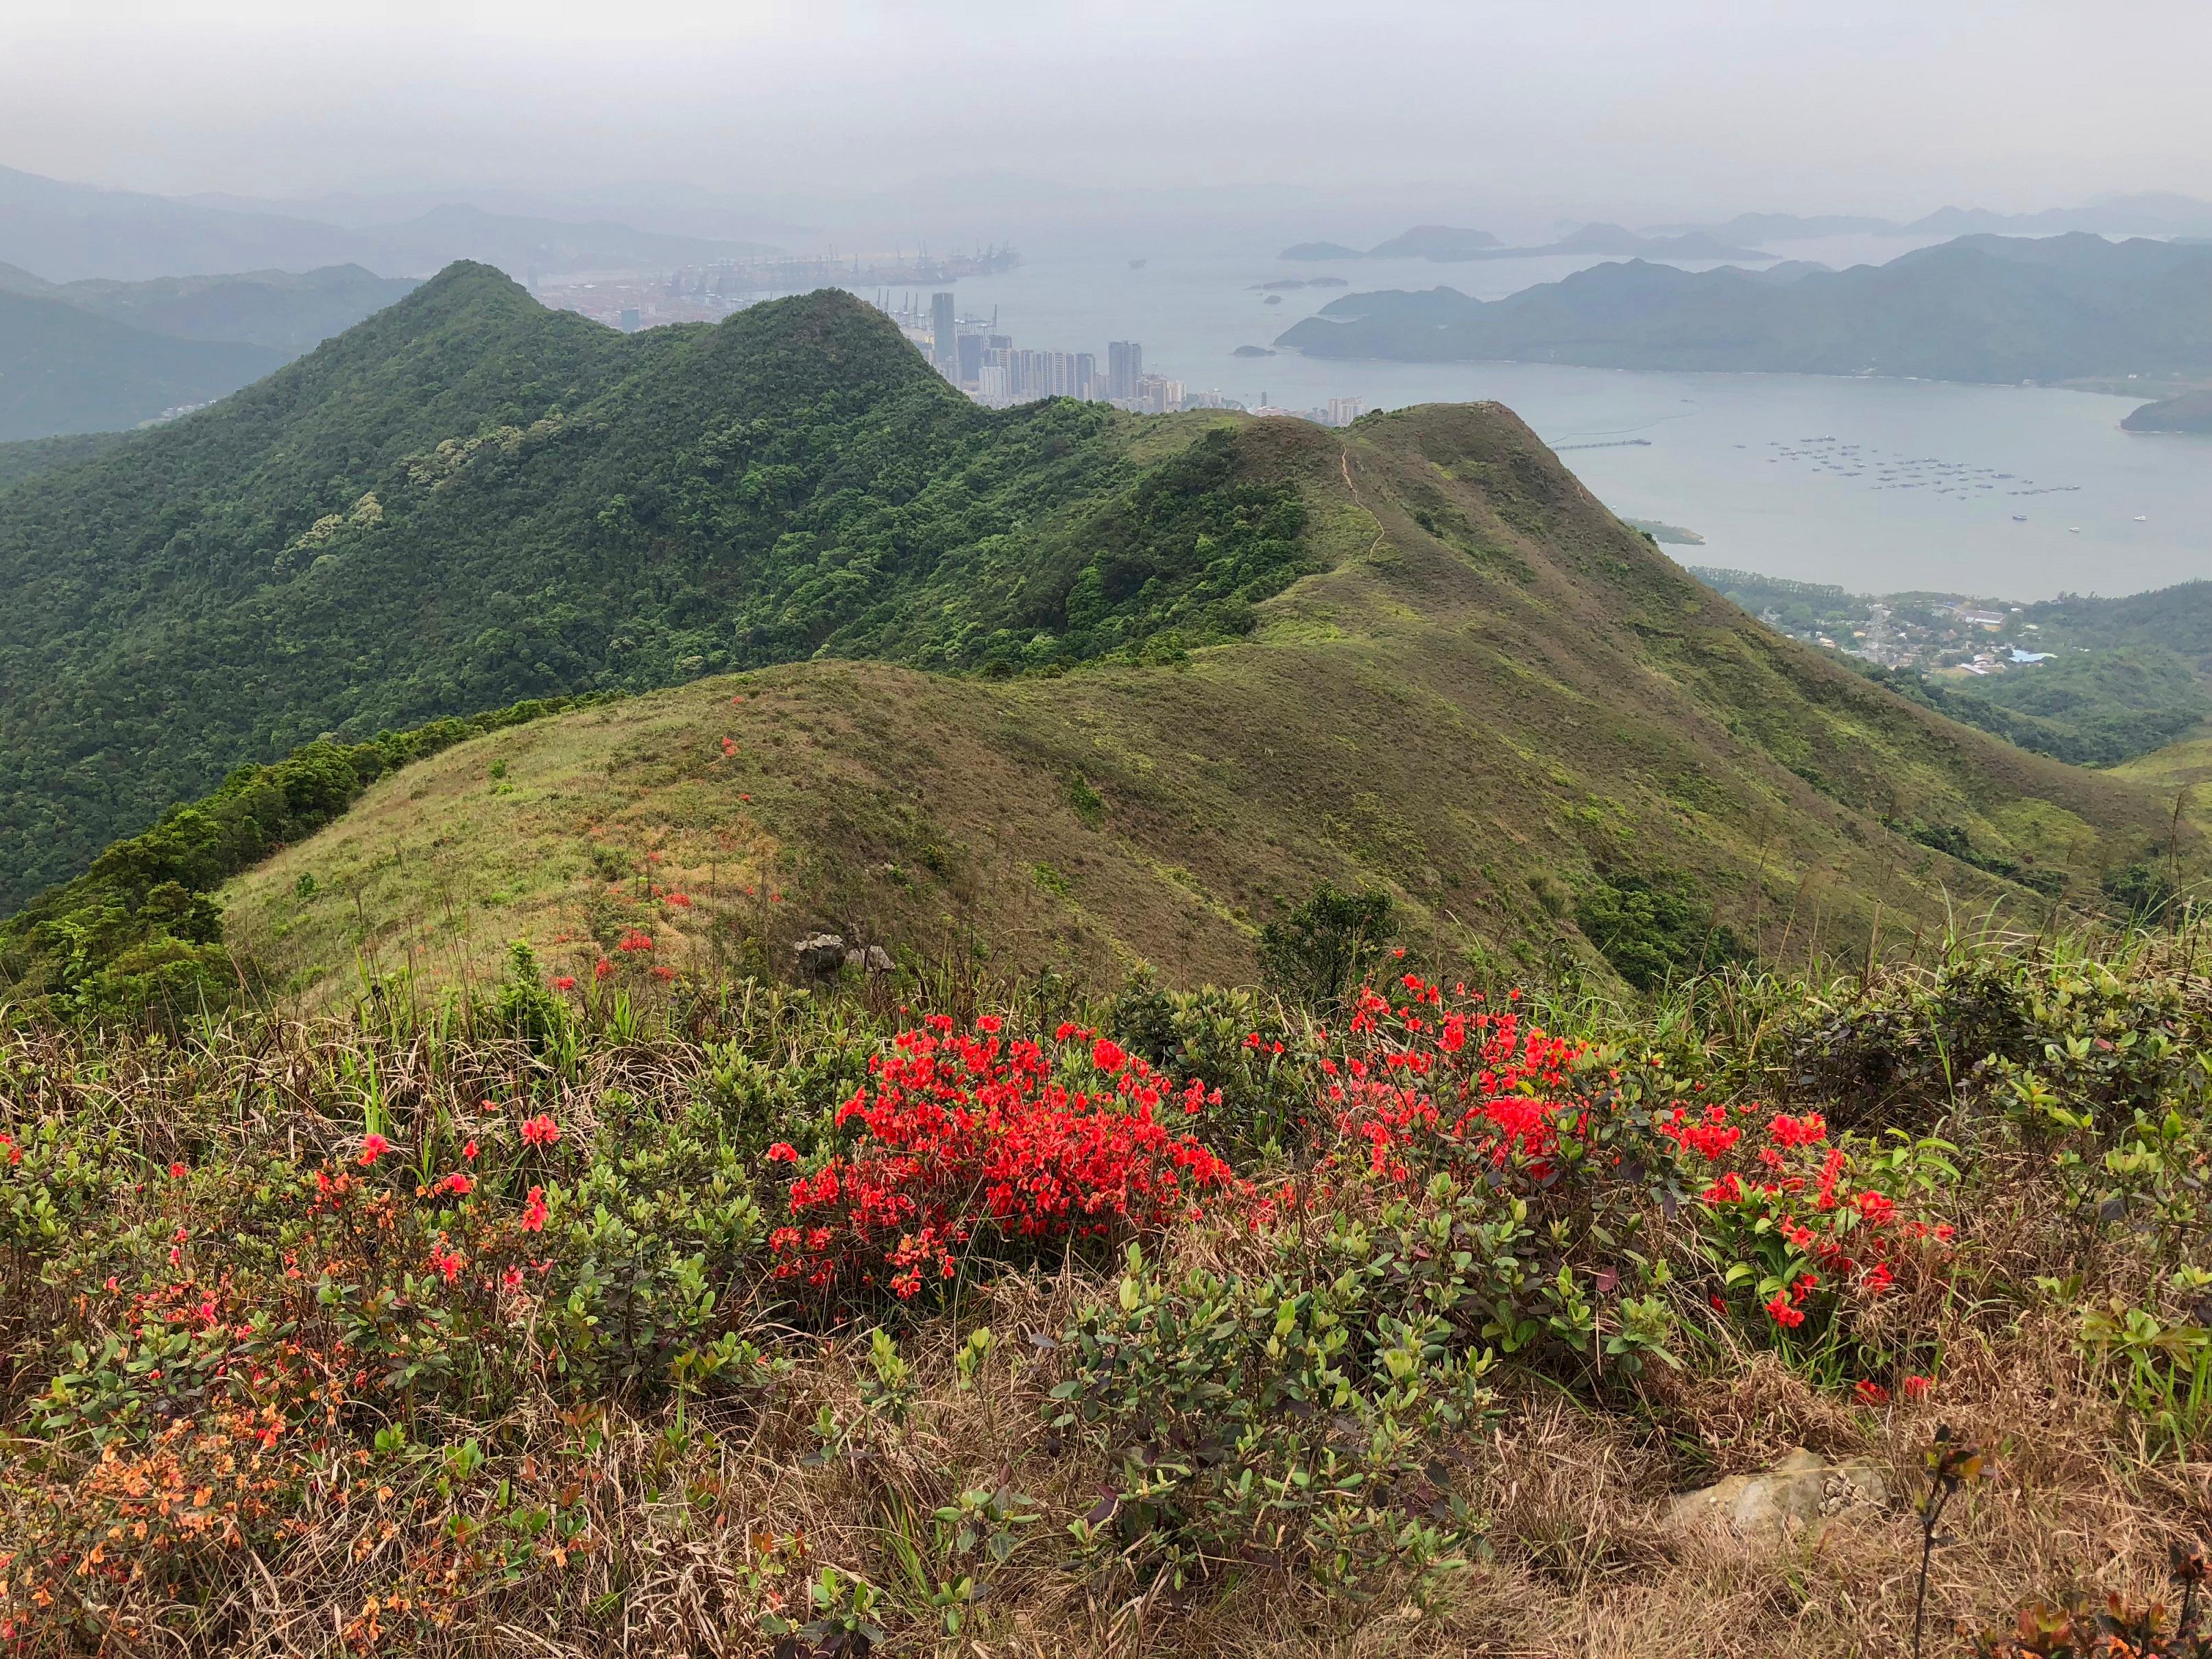 The Agriculture, Fisheries and Conservation Department announced today (March 1) that Robin's Nest Country Park was established the same day. Photo shows a view of ridges from Hung Fa Chai.

